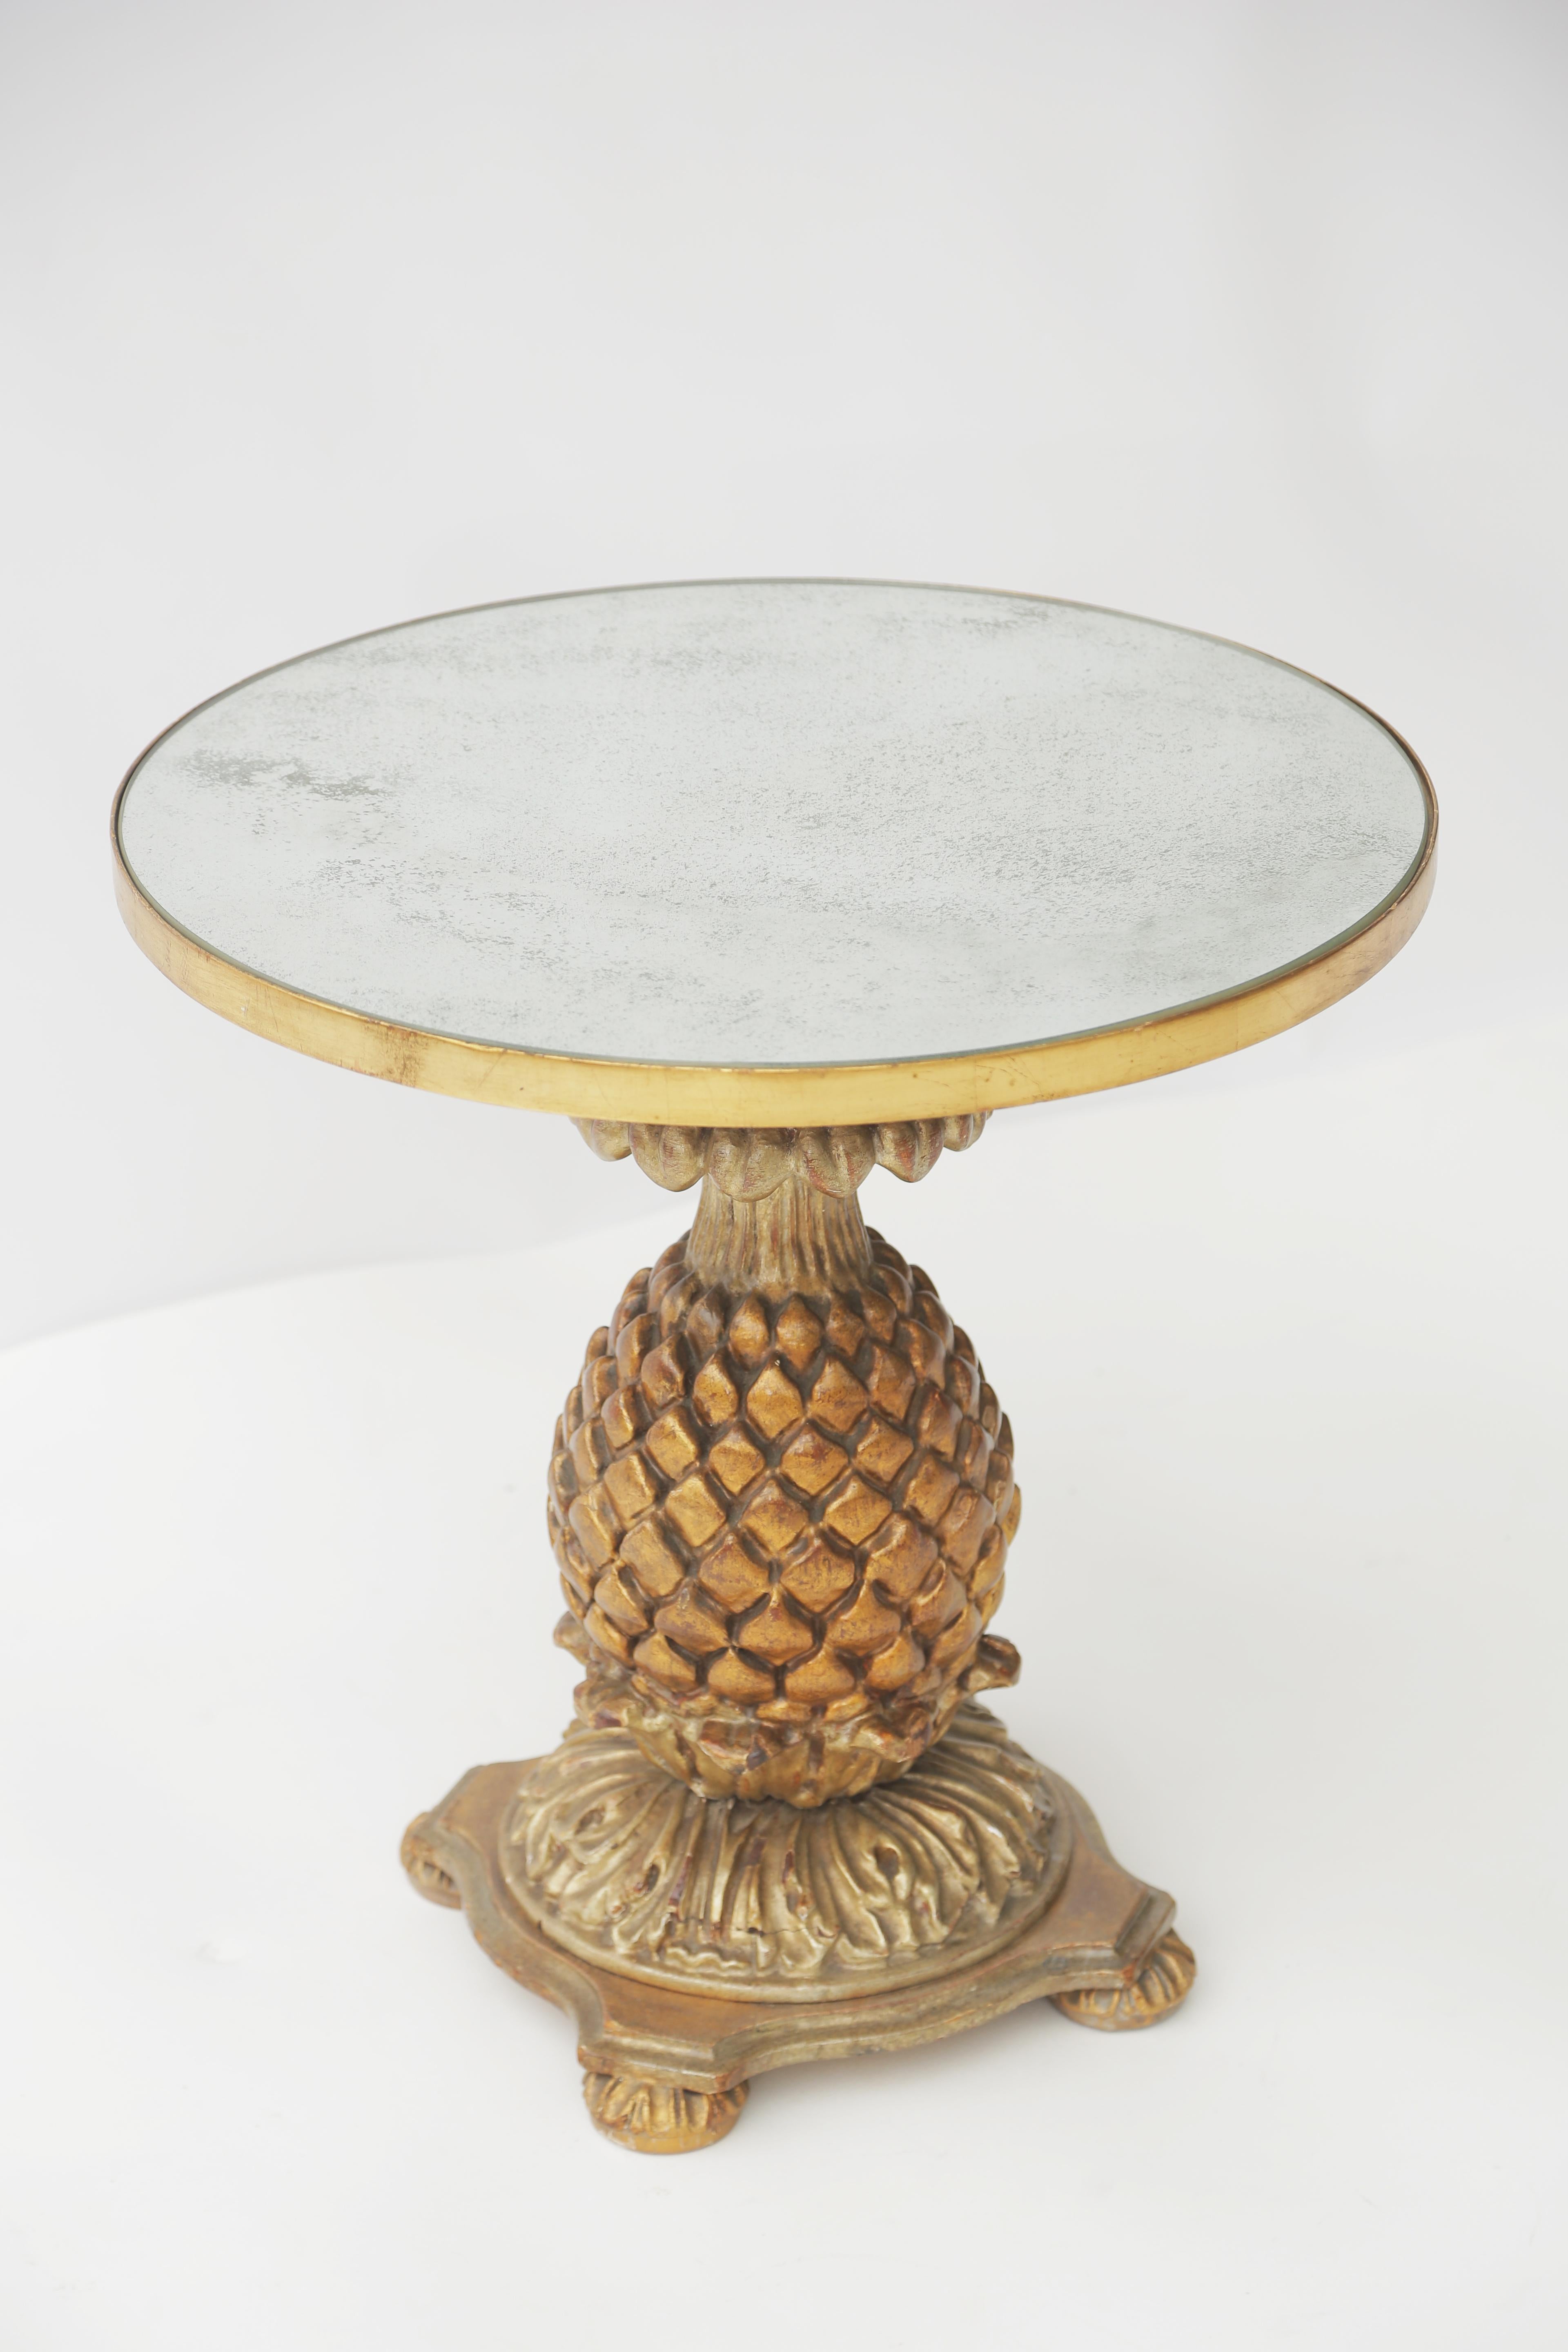 Side table, having a round top of aged mirrorplate with giltwood border, on base of wood, hand-carved in the form of a large, stylized pineapple; its body a darker stained wood with parcel gilt, on round, foliate foot, shaped plinth, and bun